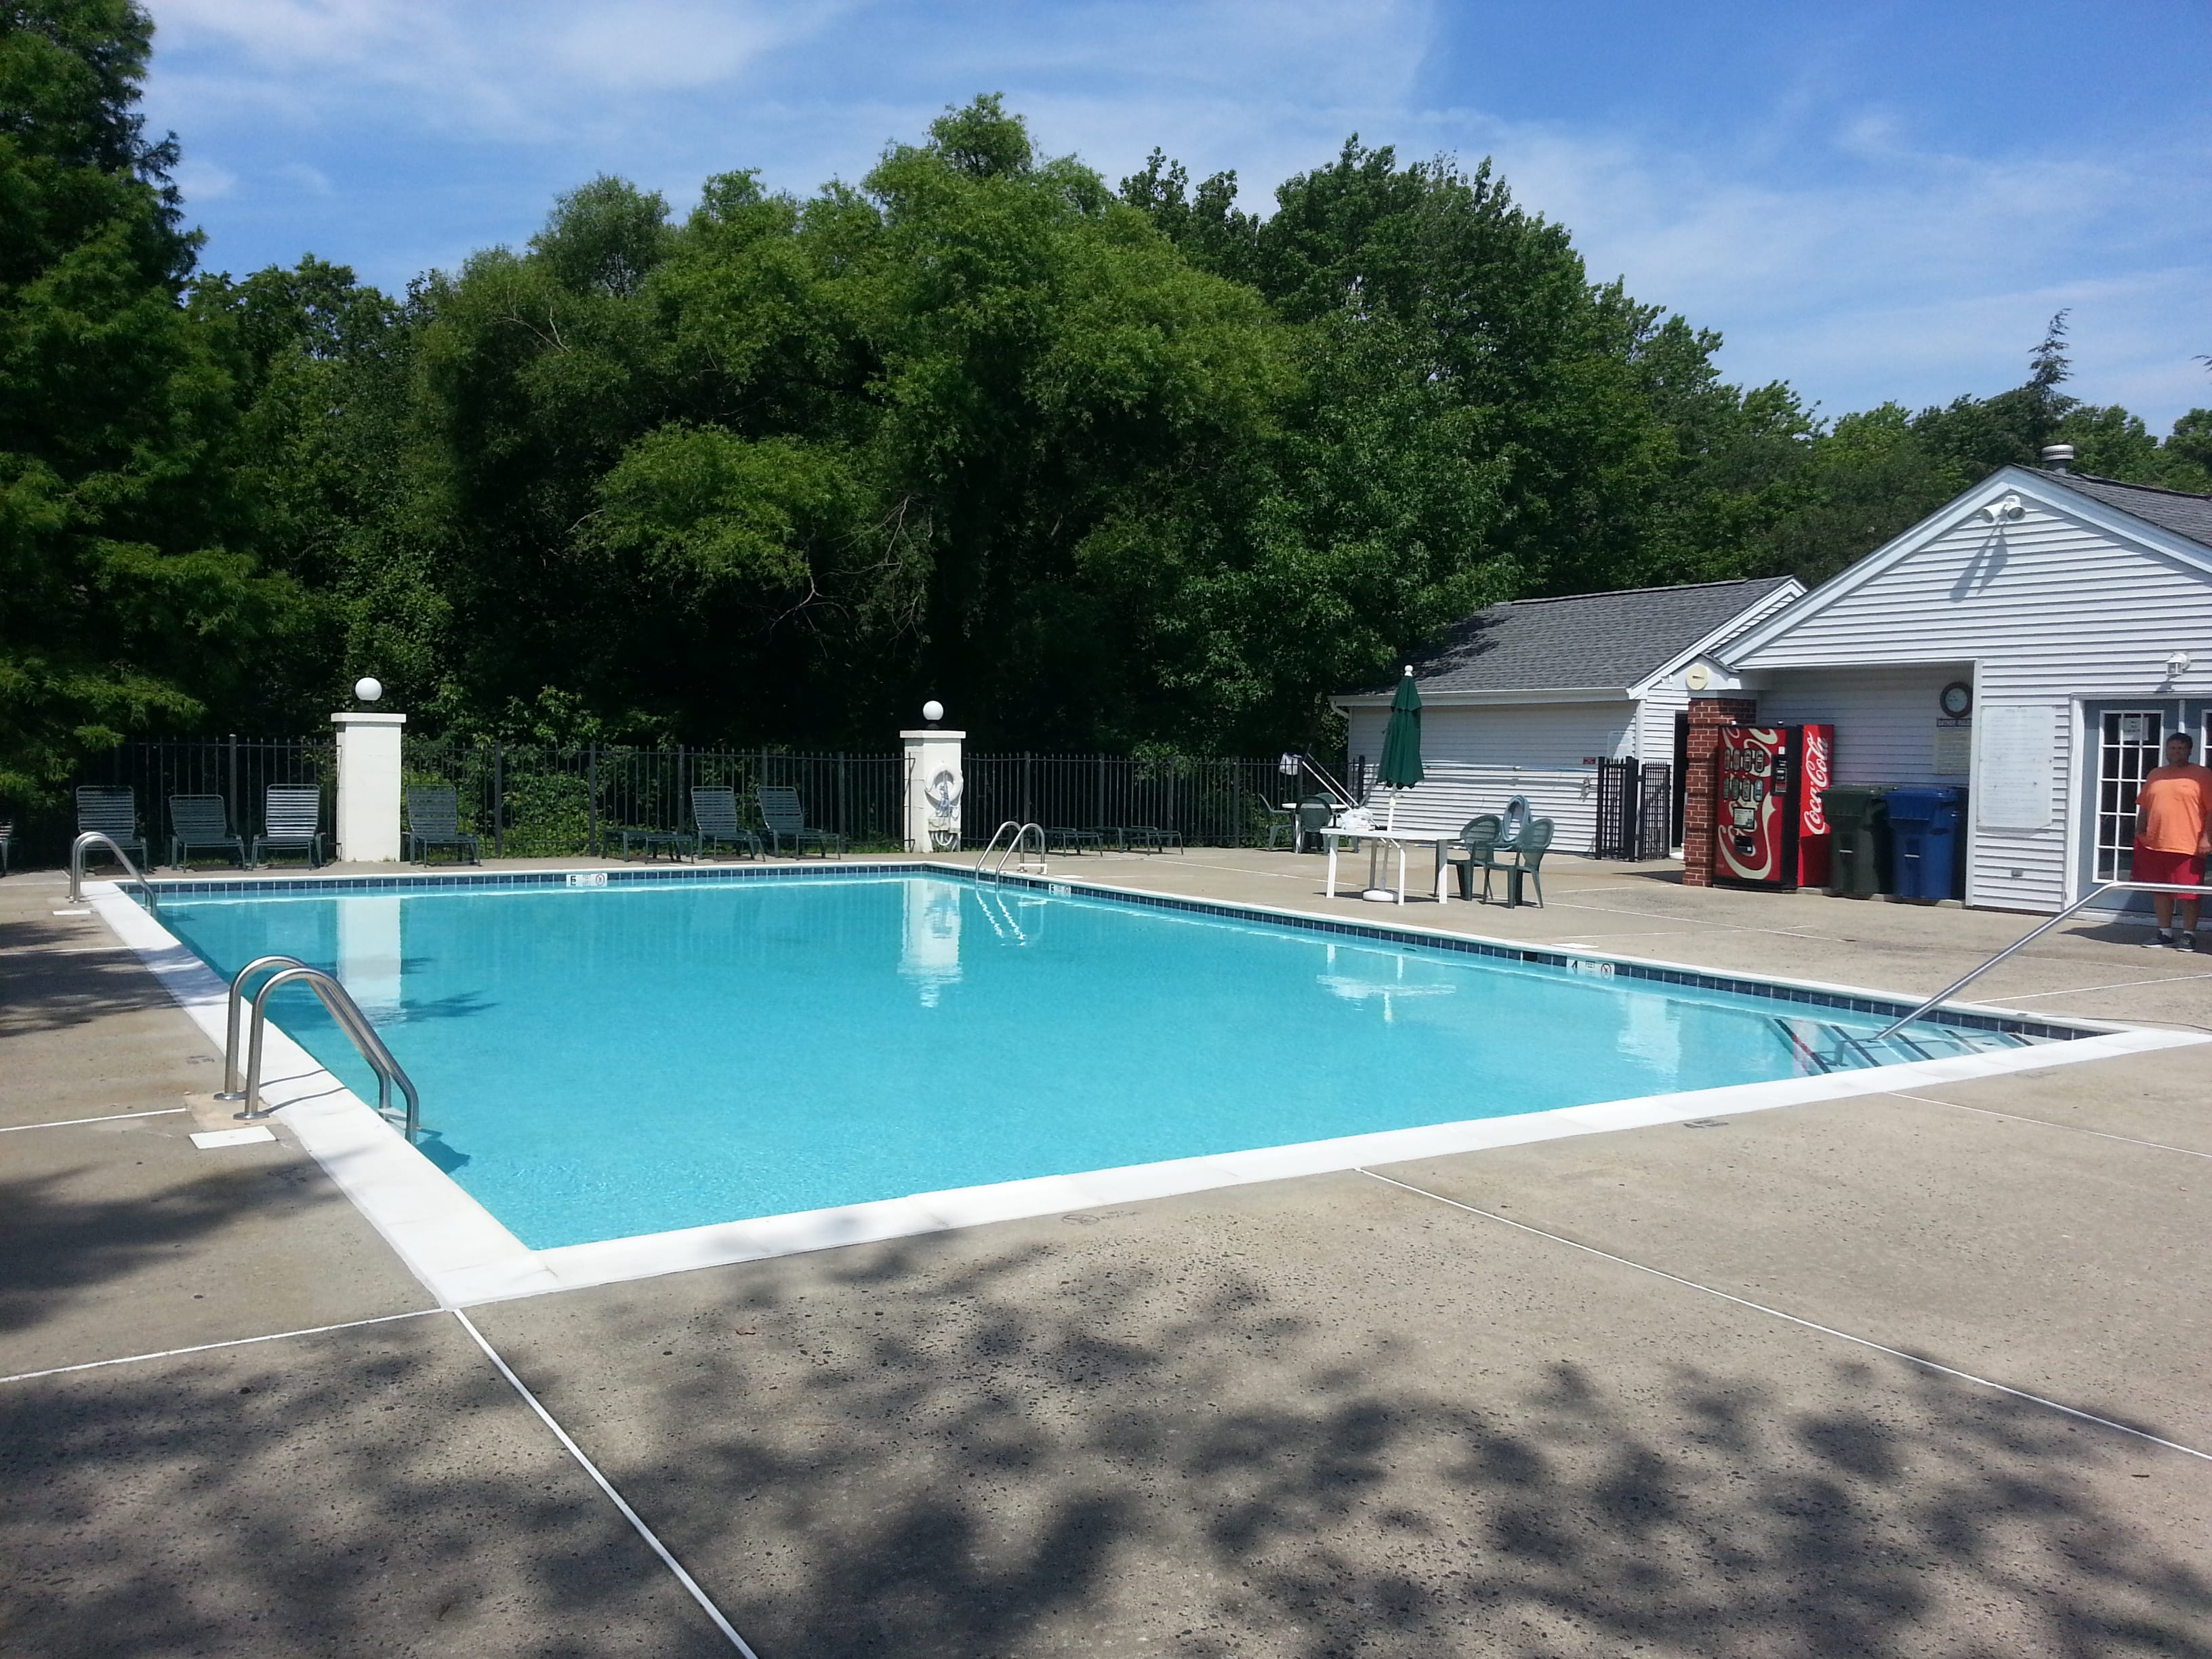 Among the amenities at the Villas at Poplar Brook is this sparking pool plus a clubhouse.